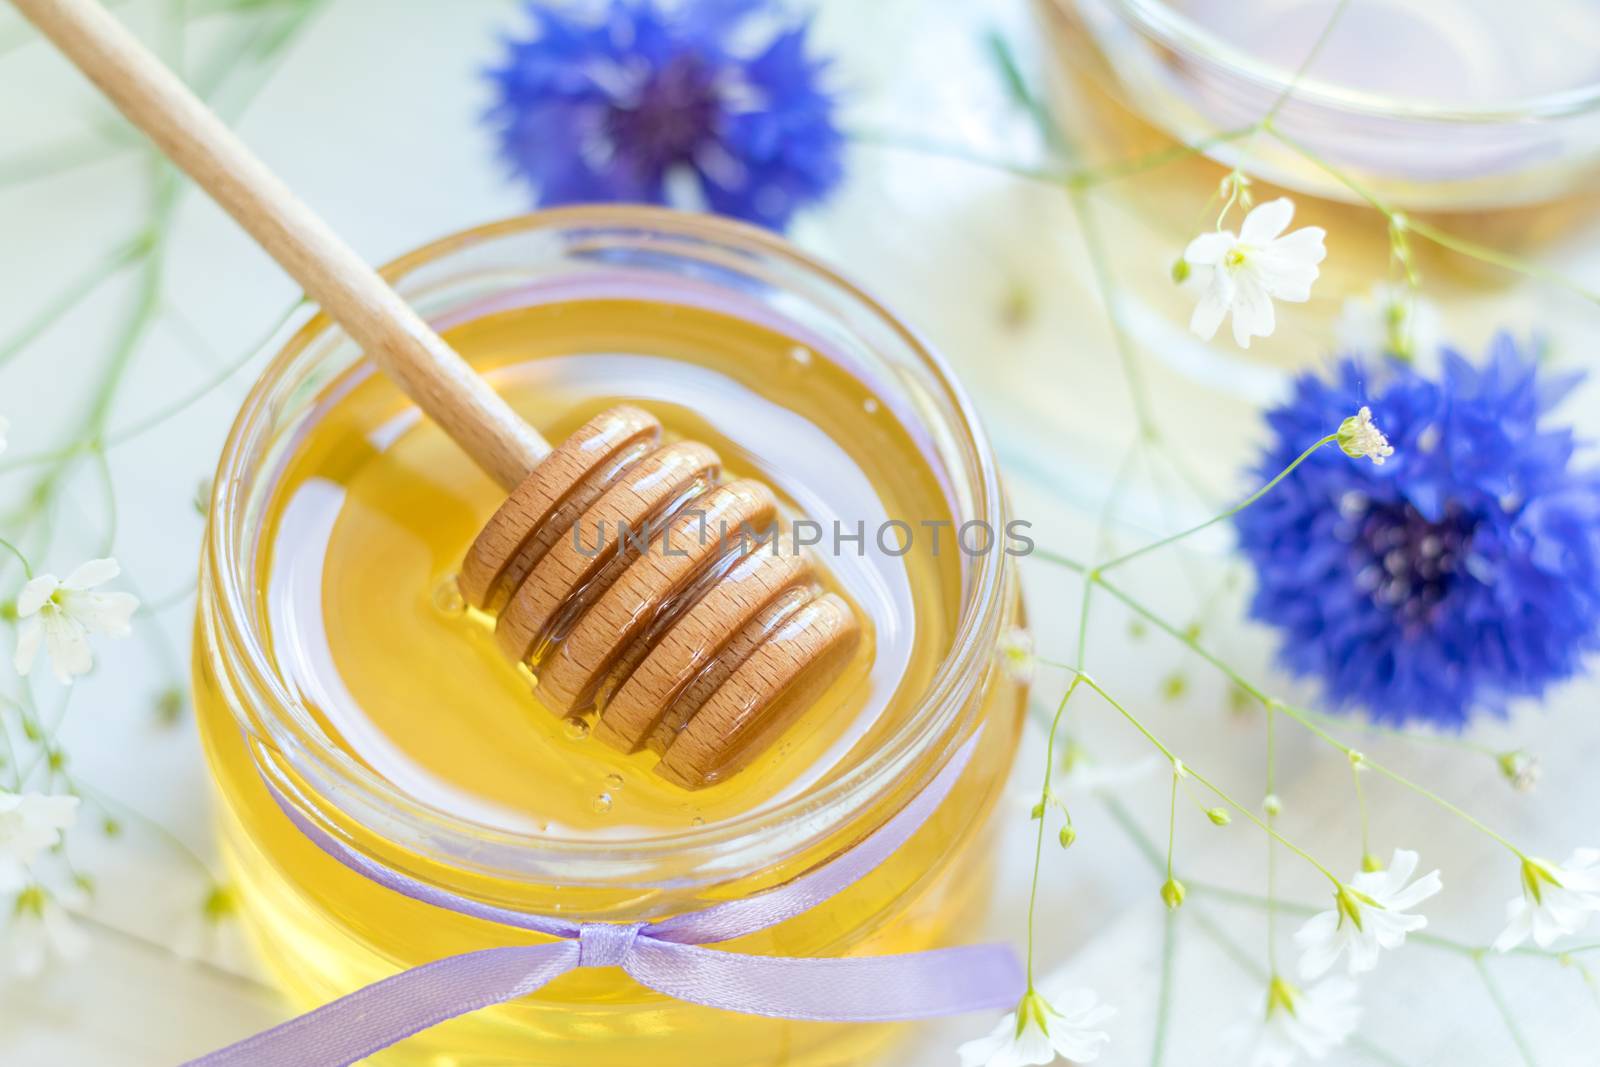 Honey in glass jars and cup of tea with white spring flowers and cornflower on windowsill. Shallow depth of field.